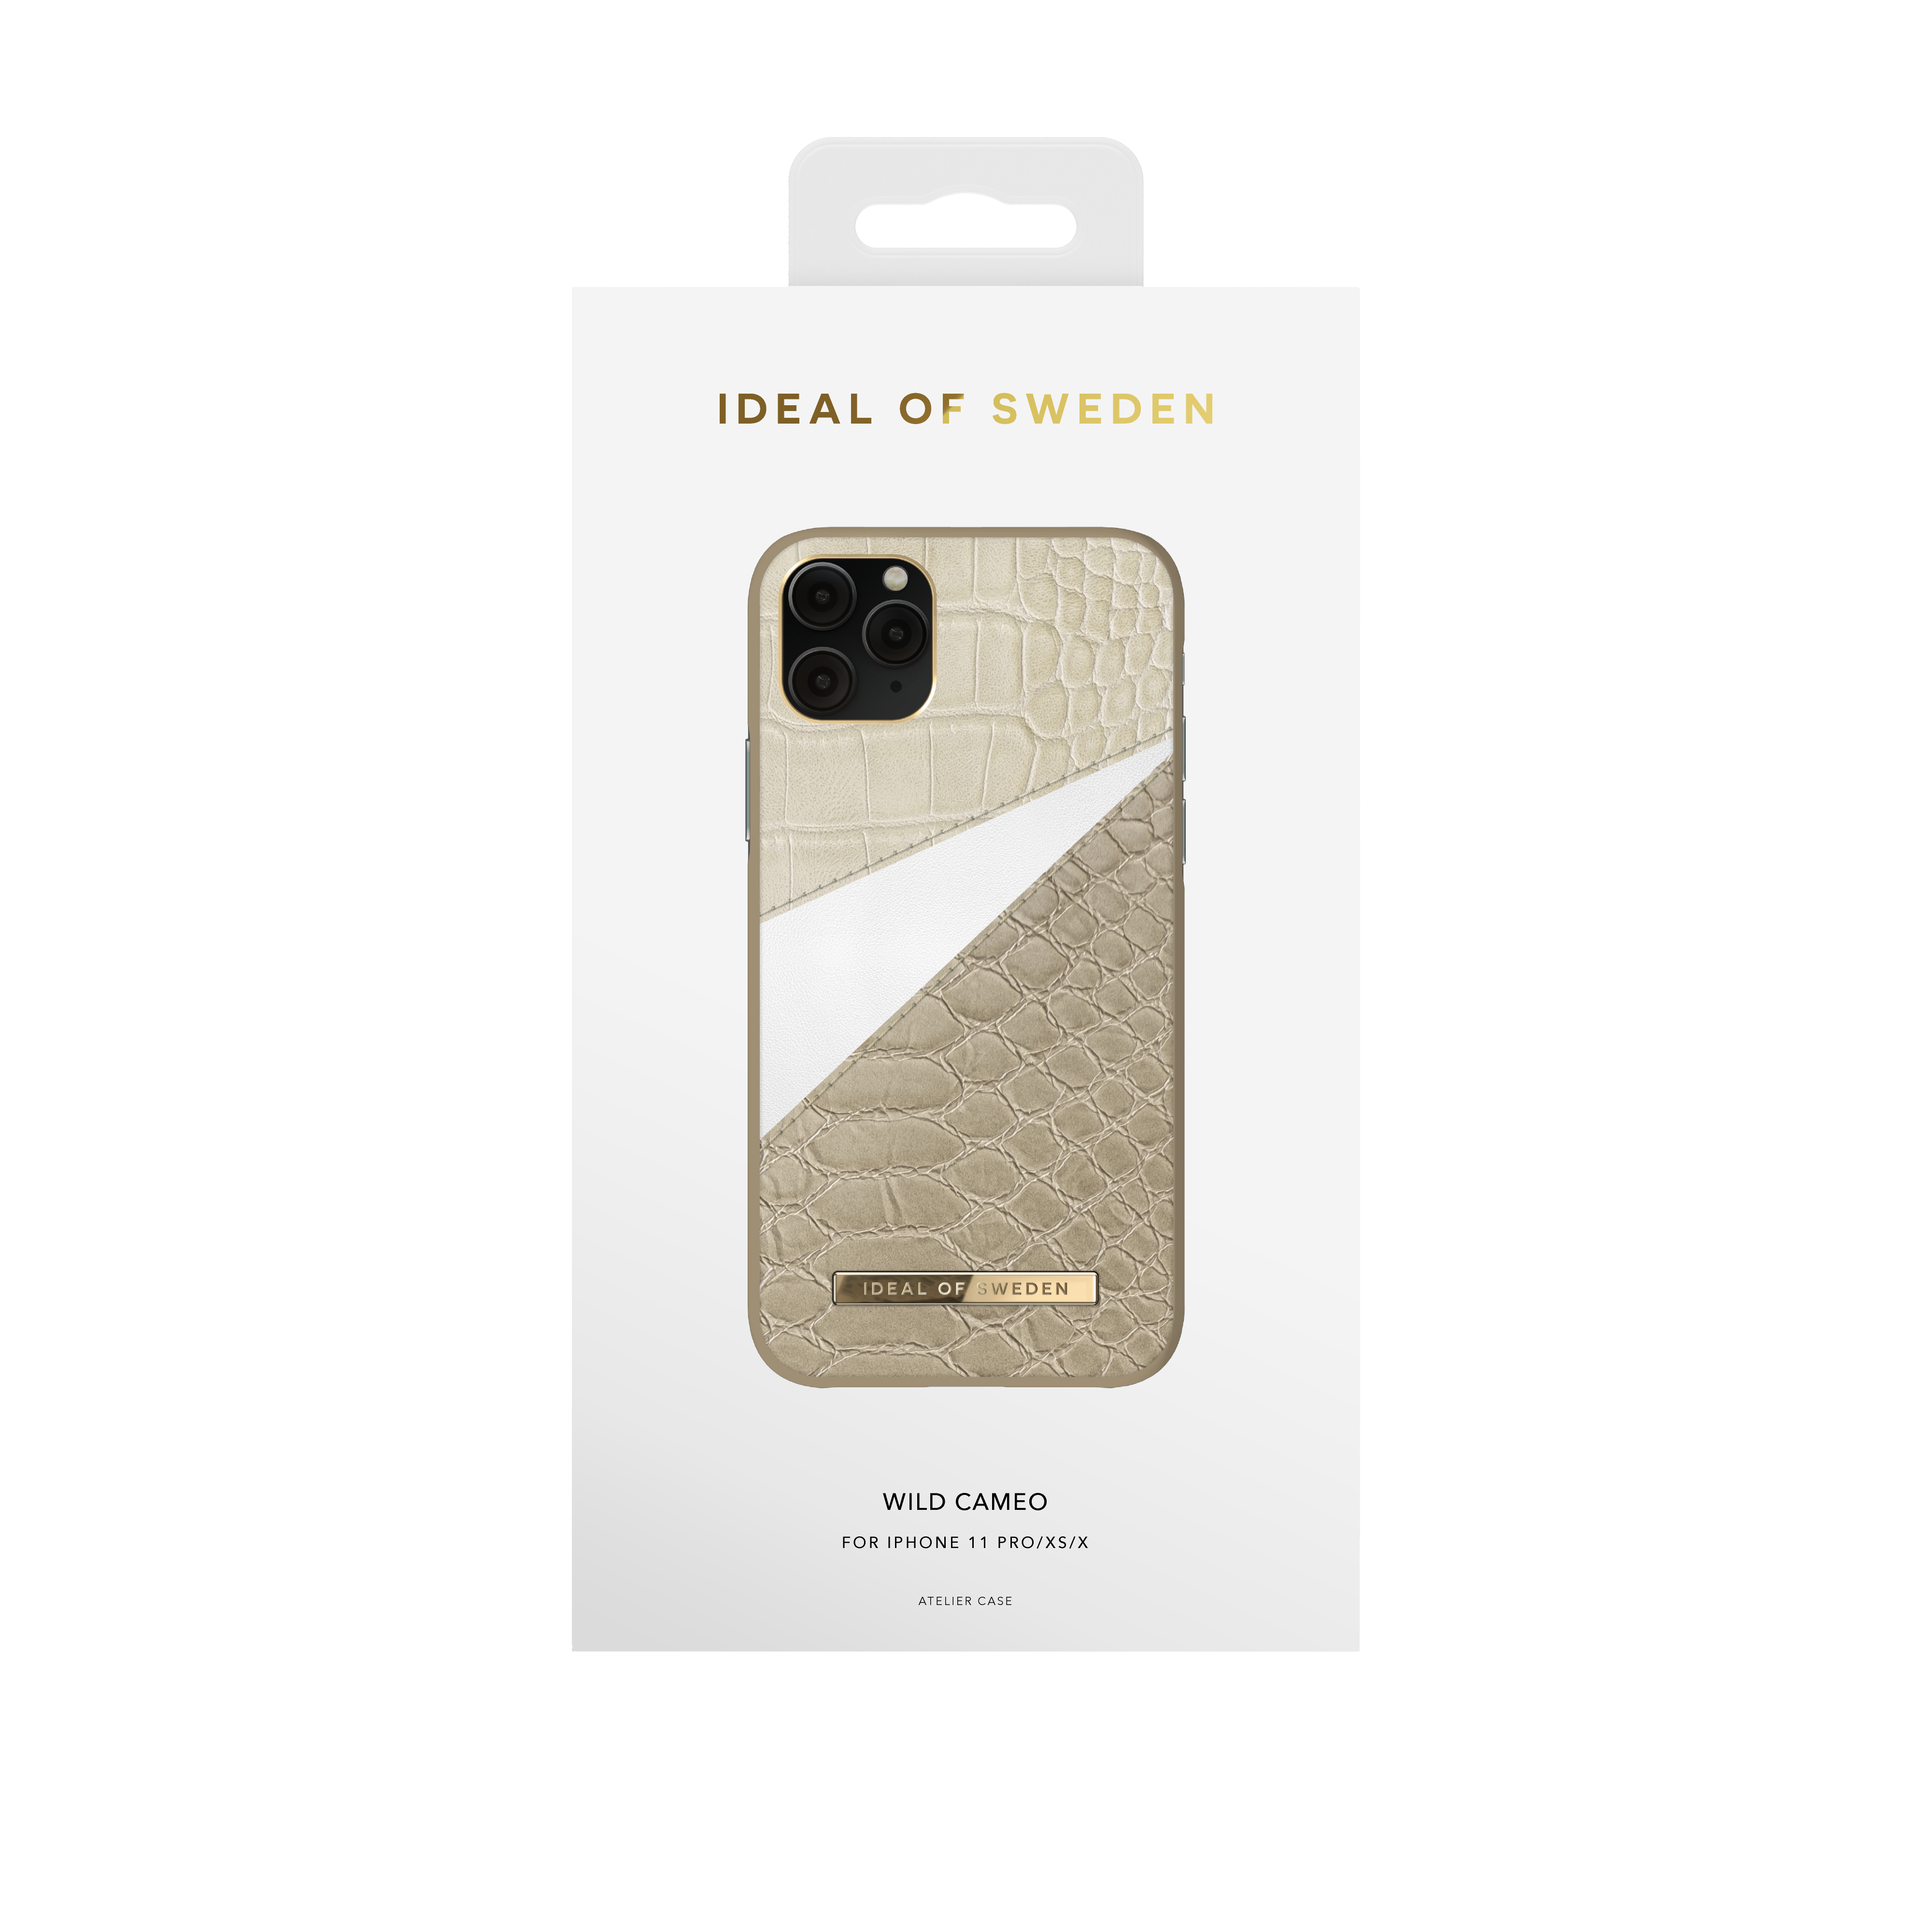 IDEAL OF SWEDEN IDACAW20-1958-246, Backcover, Pro, Cameo Apple, XS, Wild iPhone iPhone iPhone X, 11